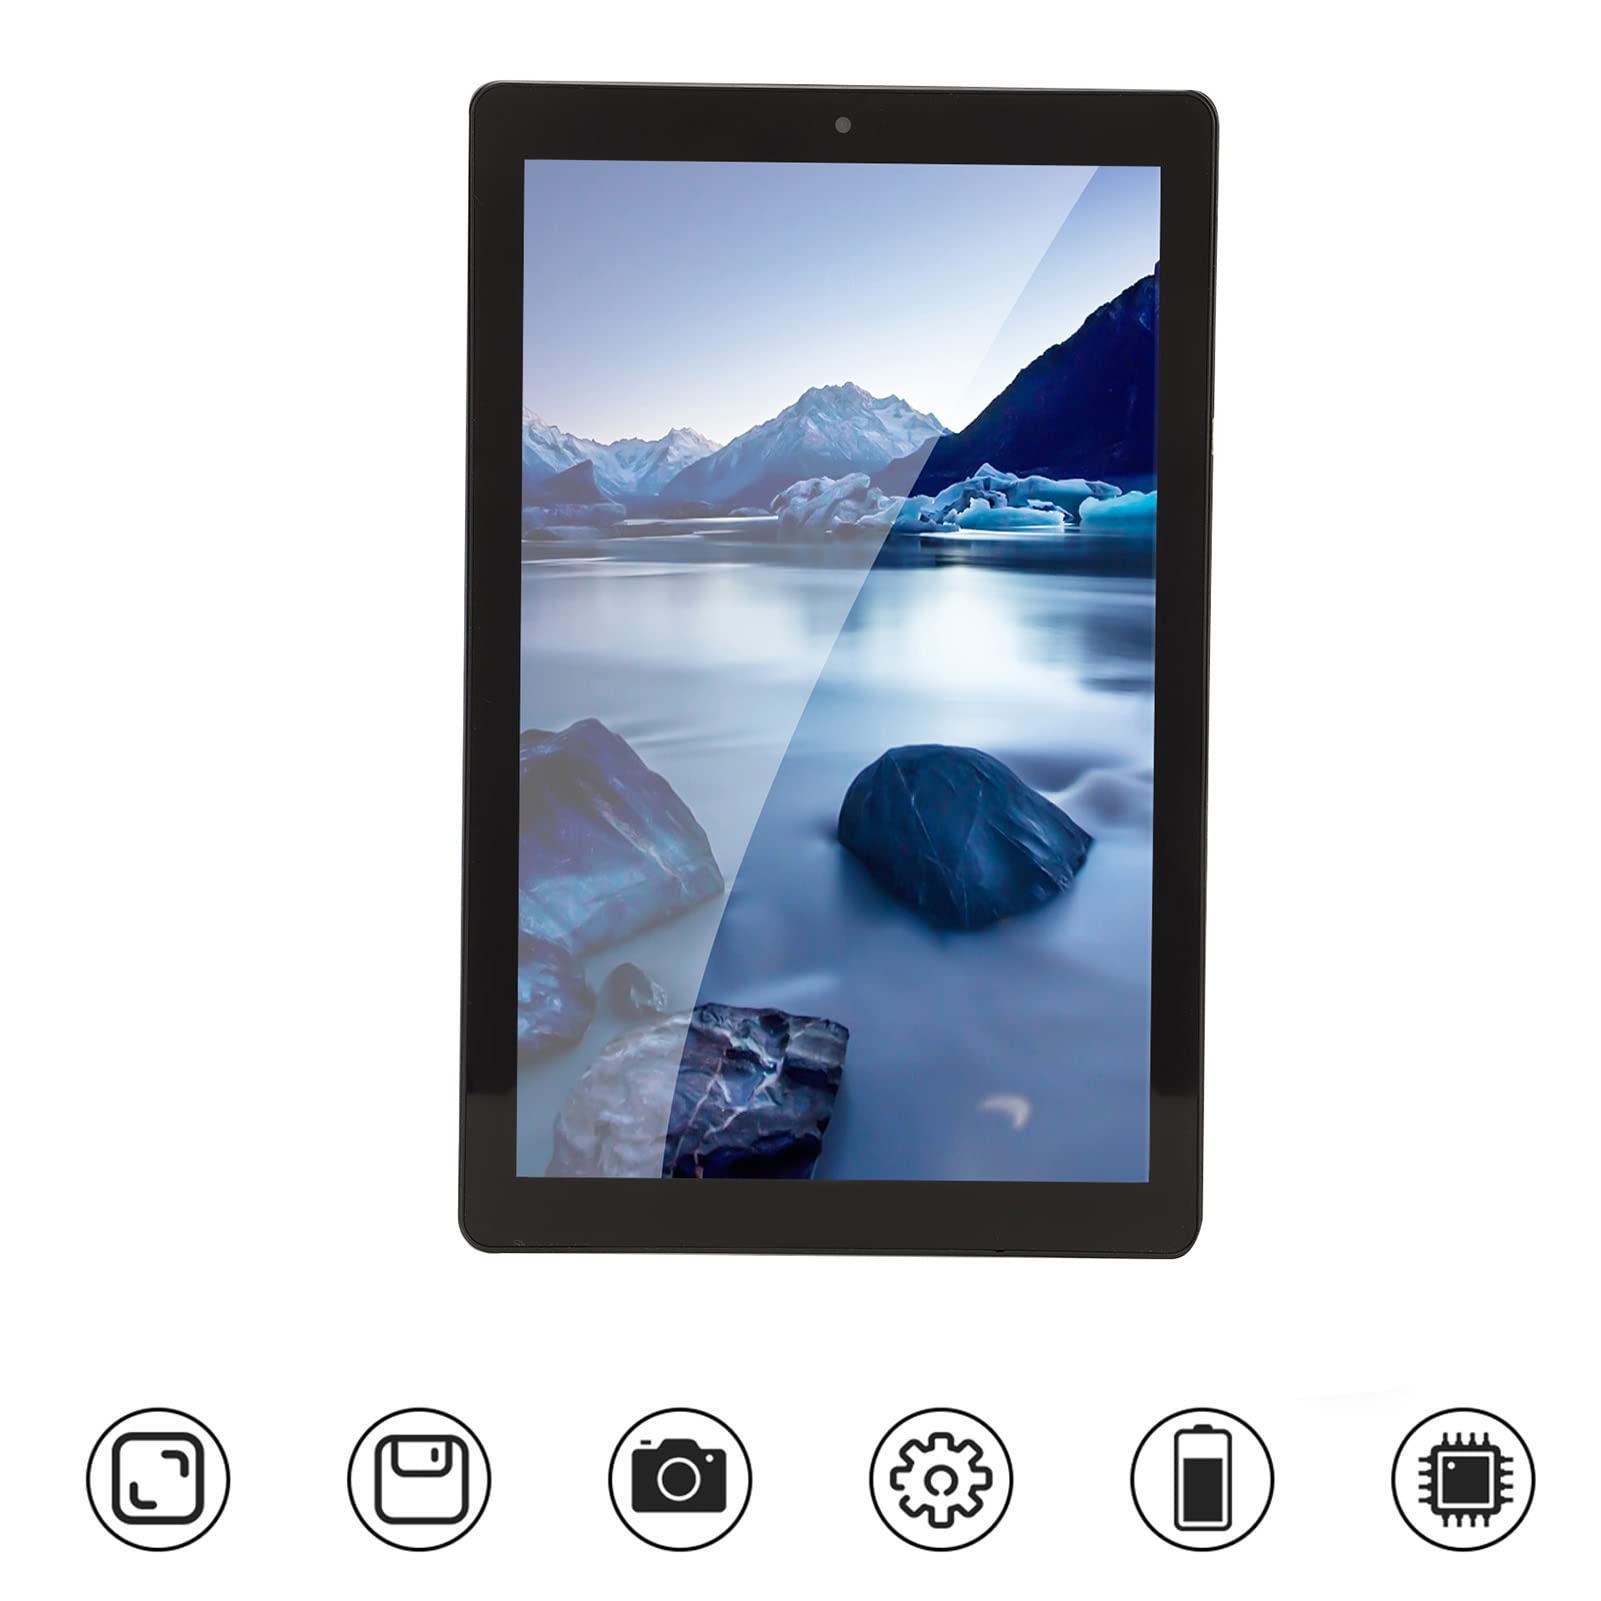 Portable Tablet, Octa Cores 1960x1080 10.1in Tablet Rear 13MP Black 100 to 240V for Business for Adults (EU Plug)